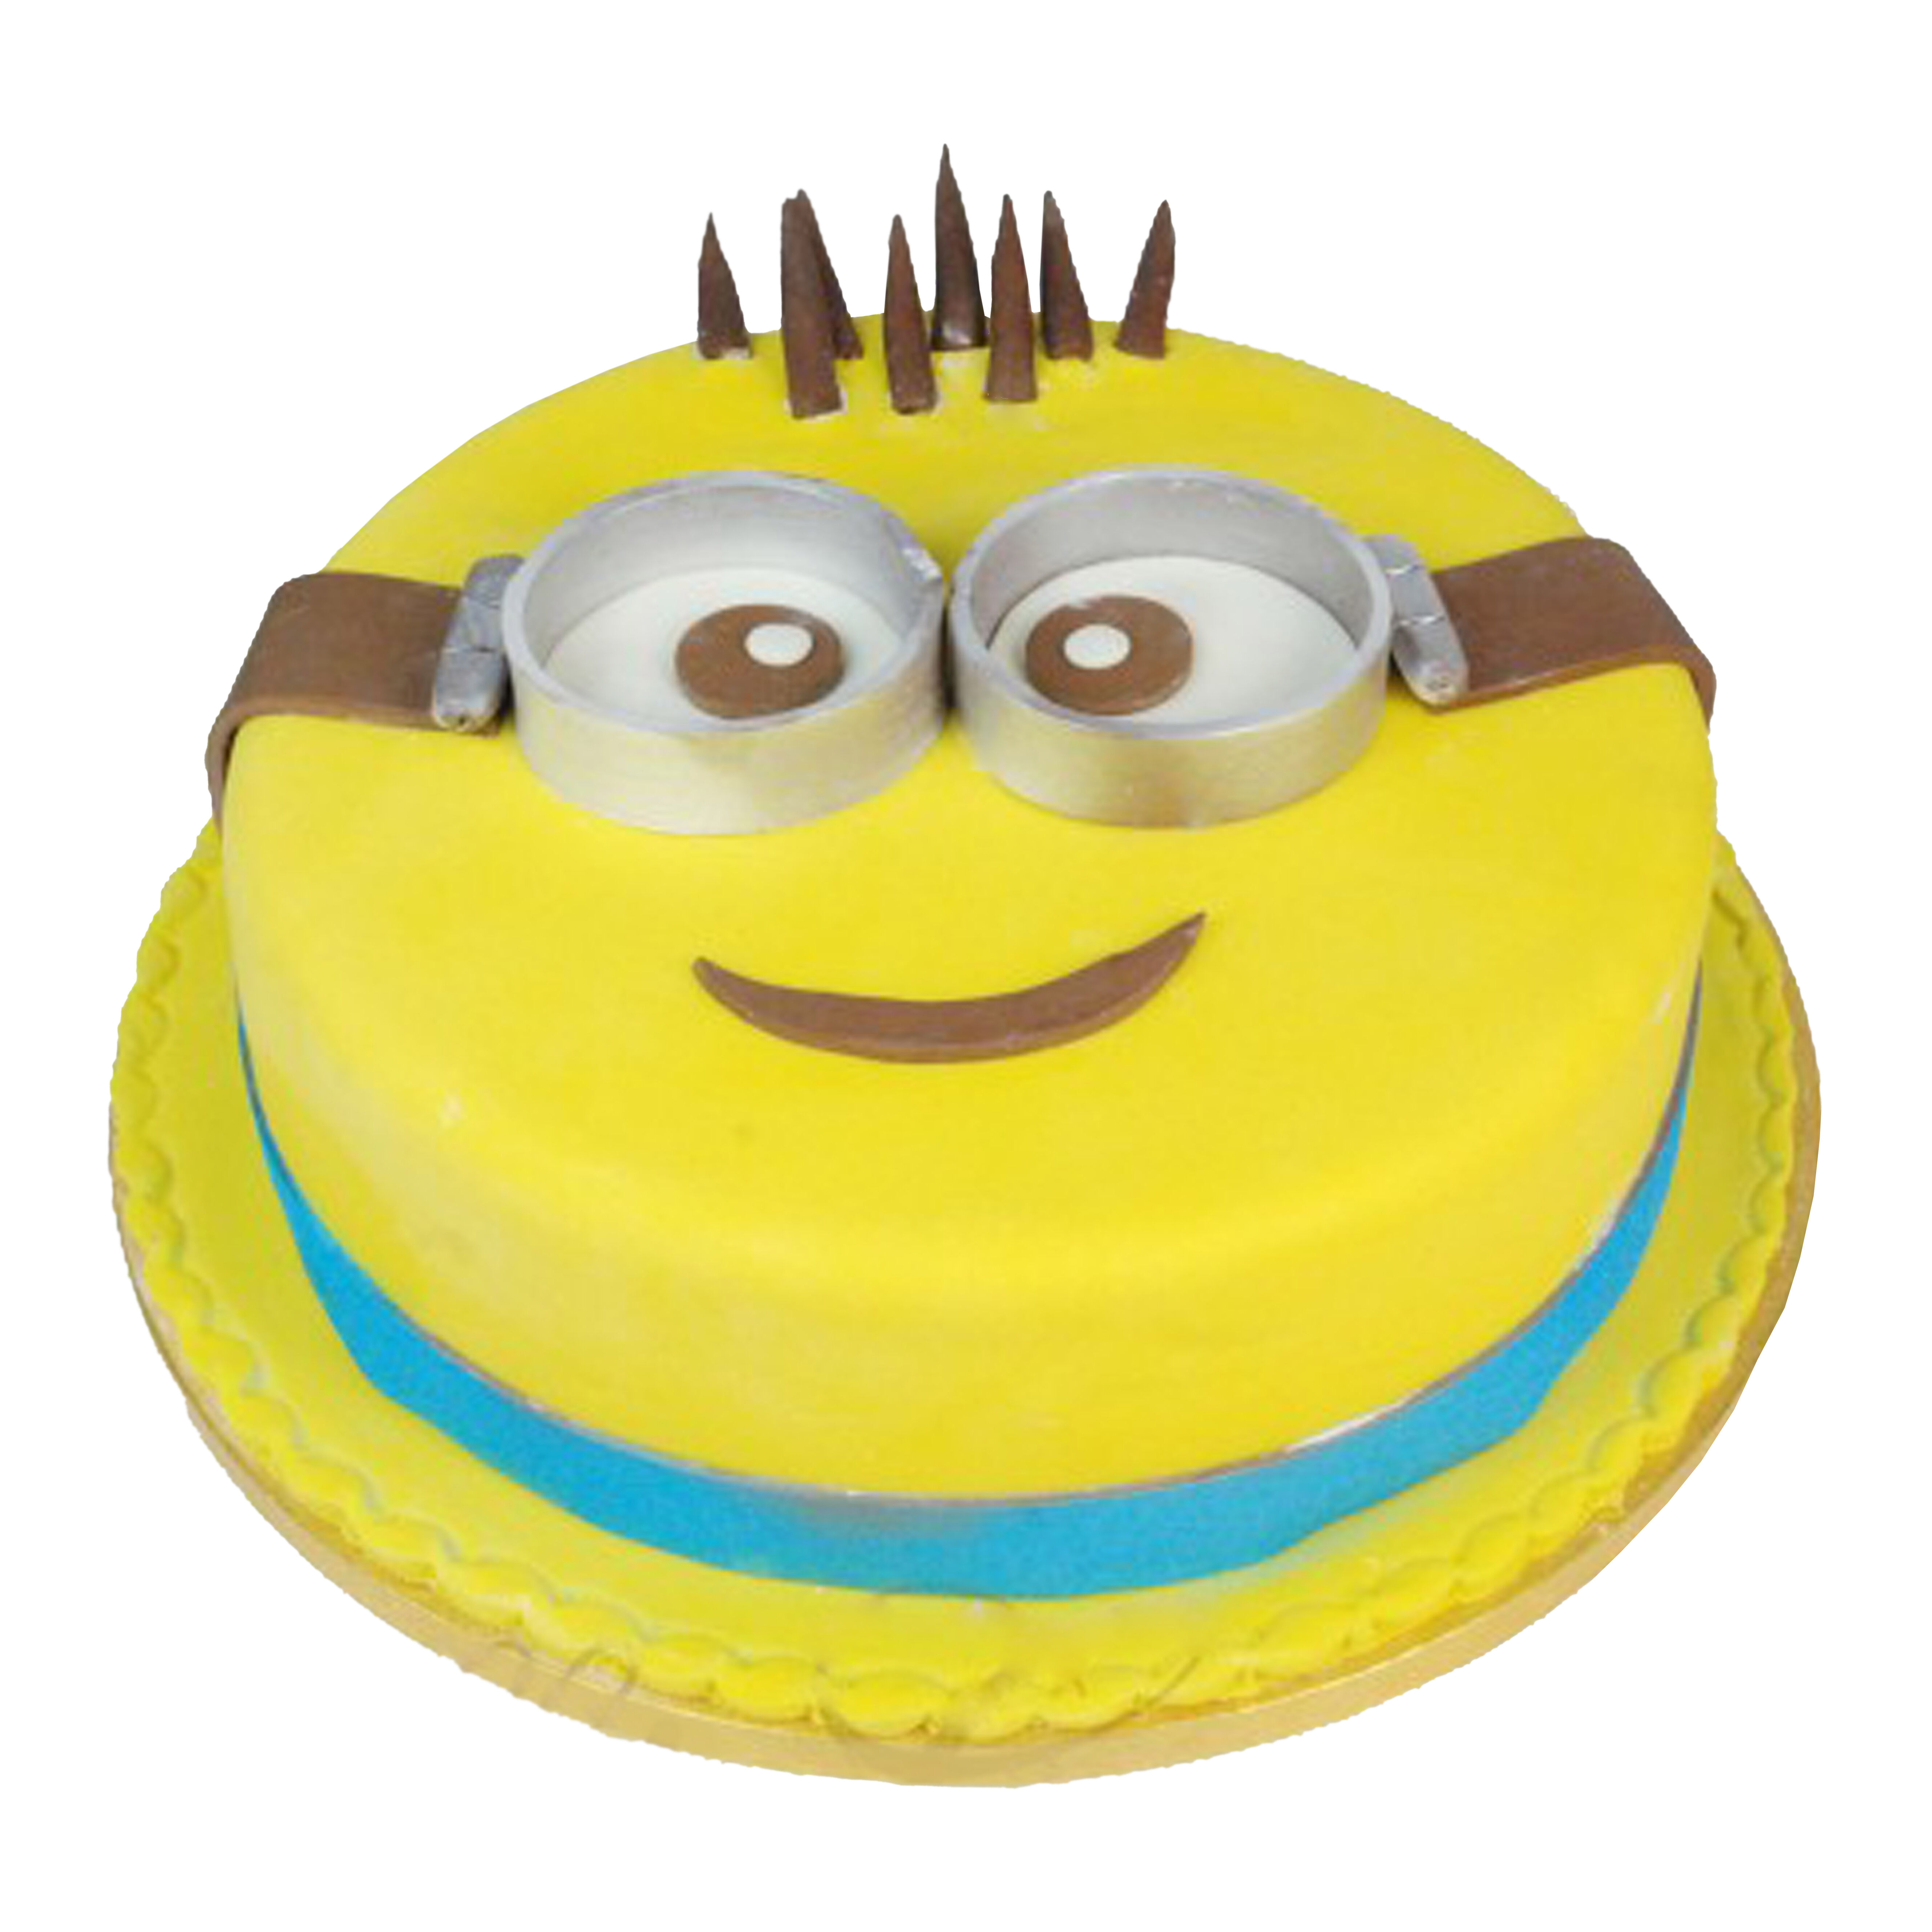 Minion Cake – Online Cake Delivery - Bloomsnberrys